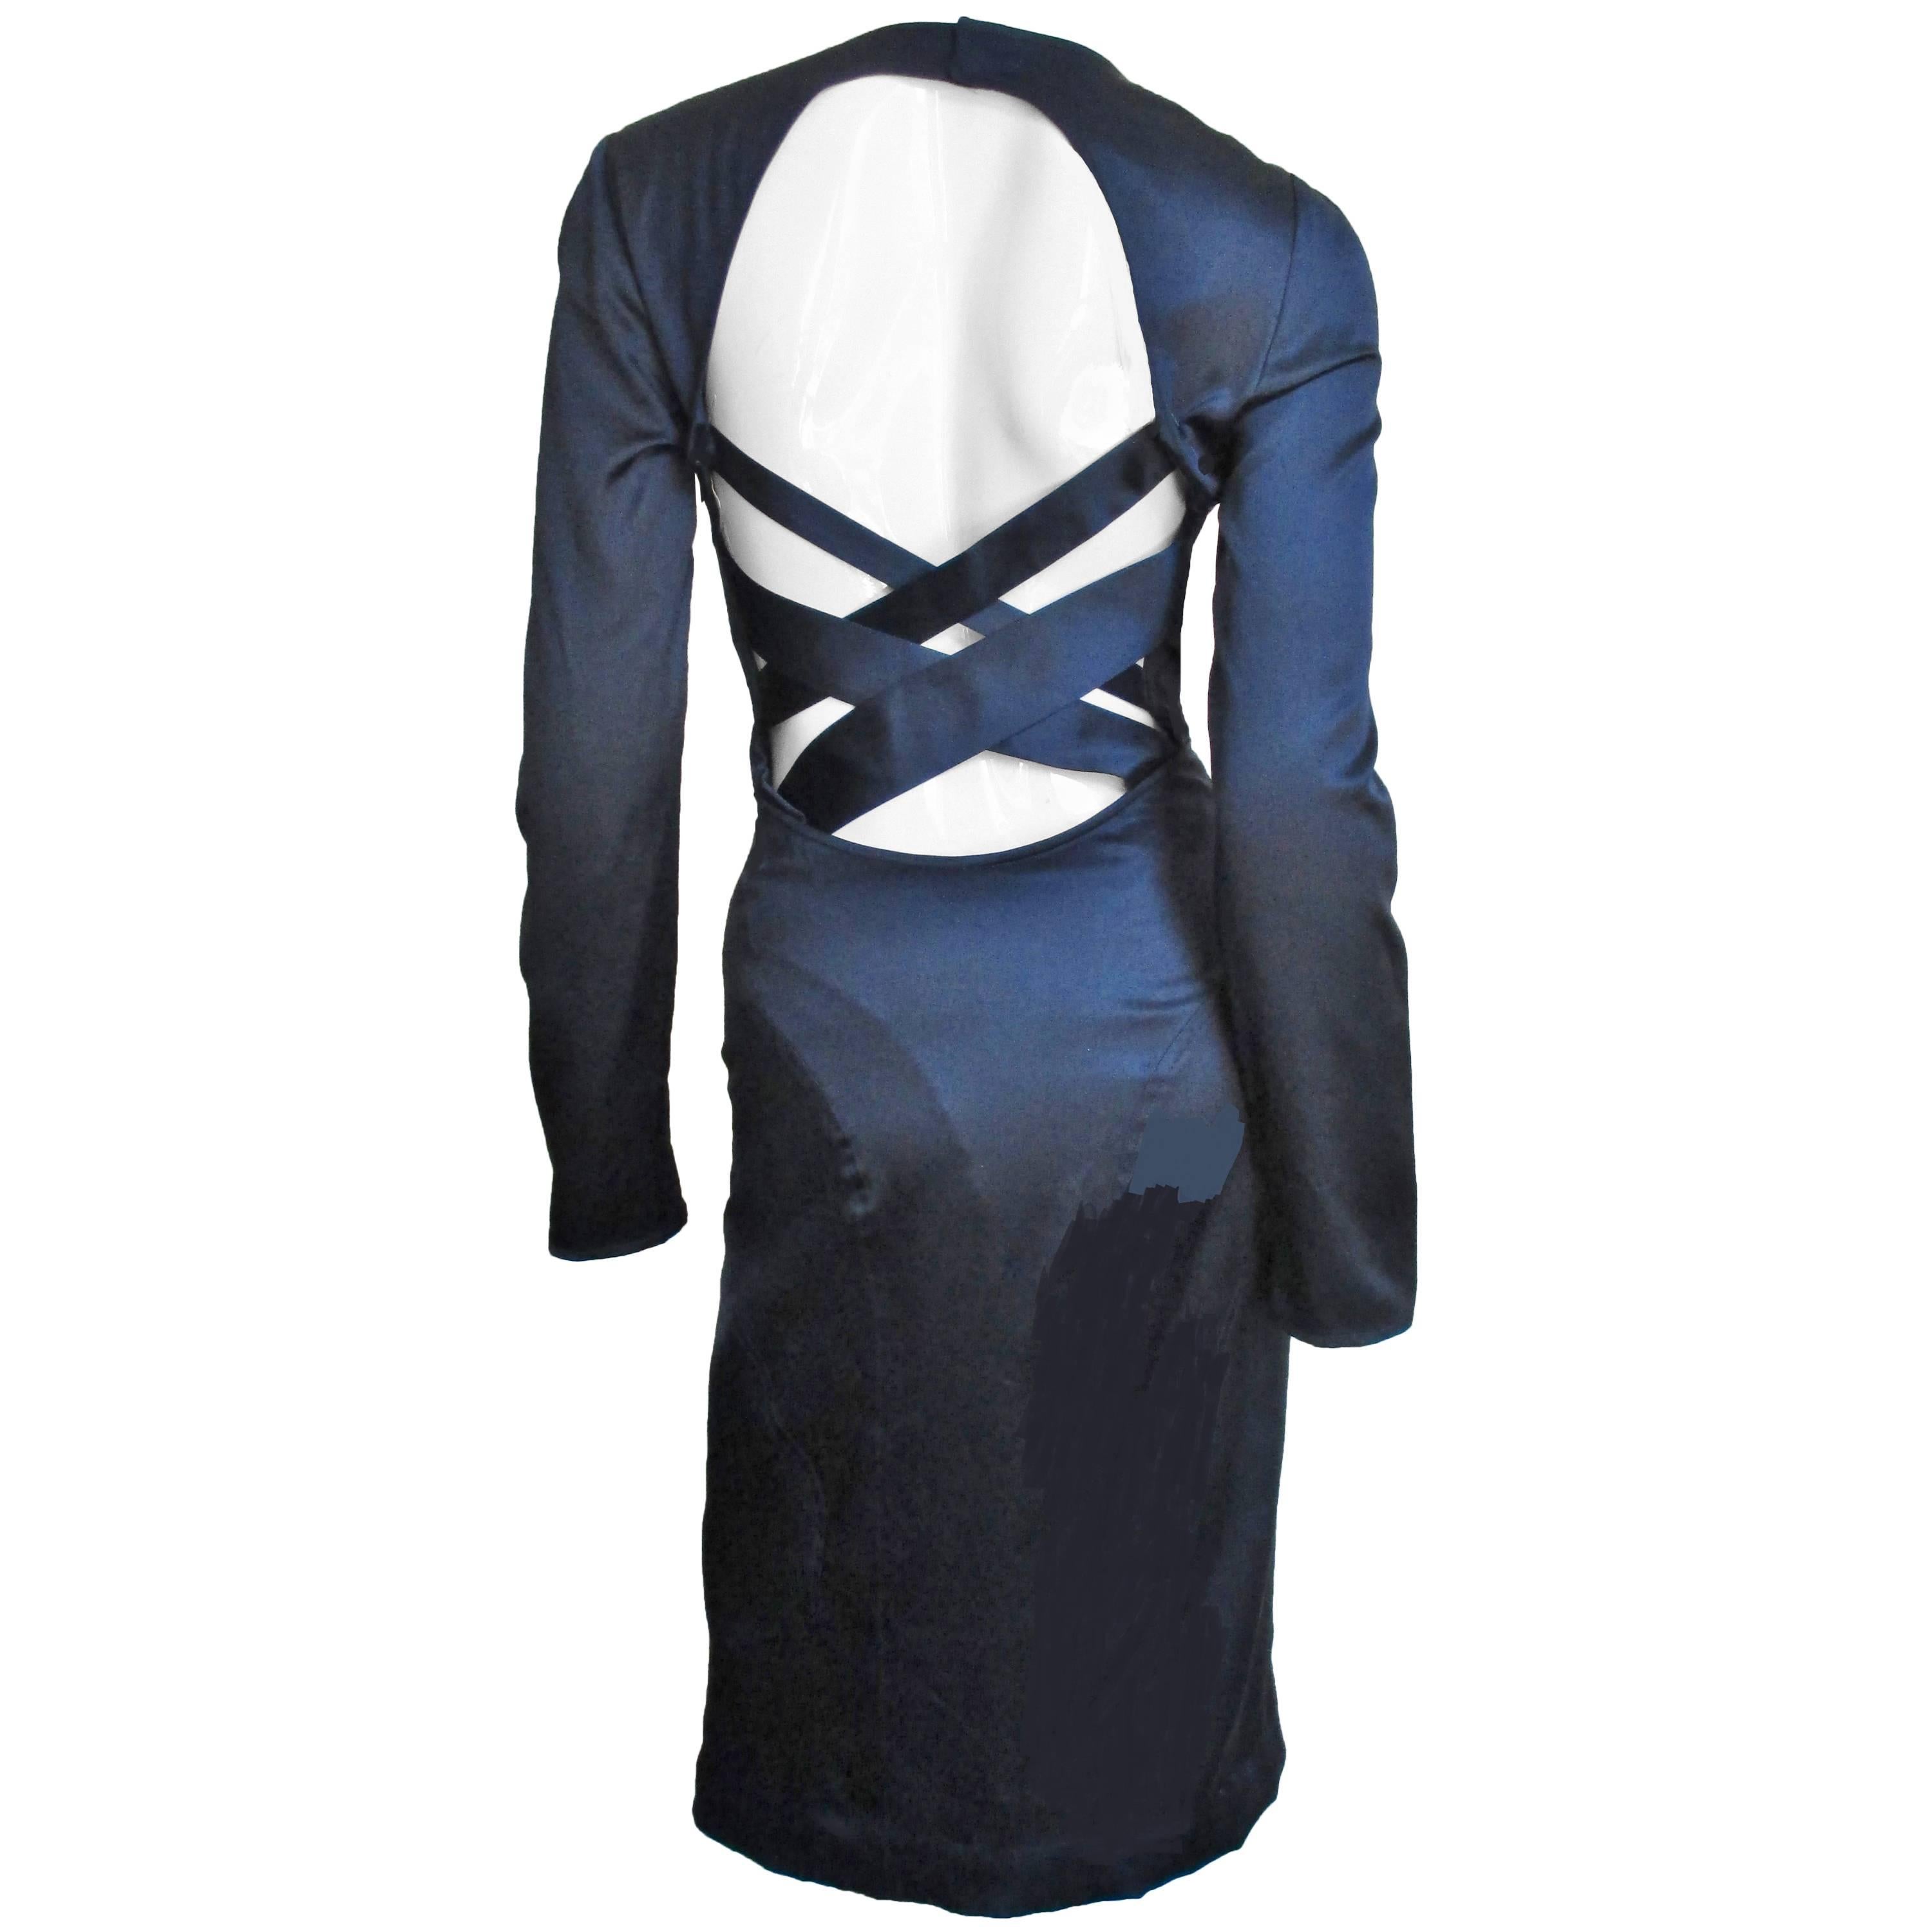 A fabulous navy silk dress with some stretch from Versace.  It is fitted with long sleeves and a scoop neckline. There are 3 flattering curved horizontal panels across the front below the bust line curving to form the back skirt and the back is